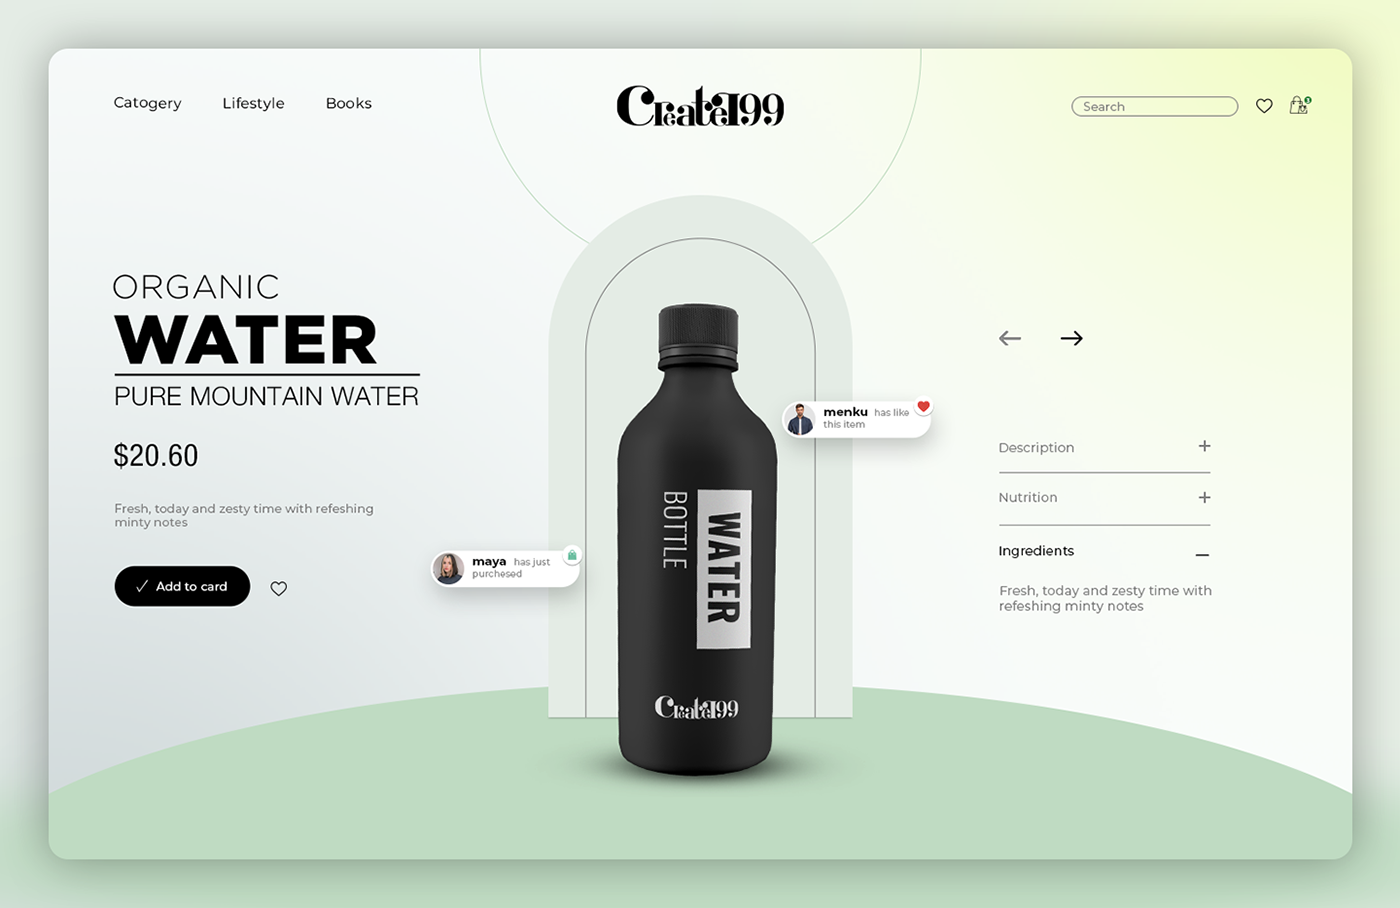 Product Page screen design idea #86: product page on Behance